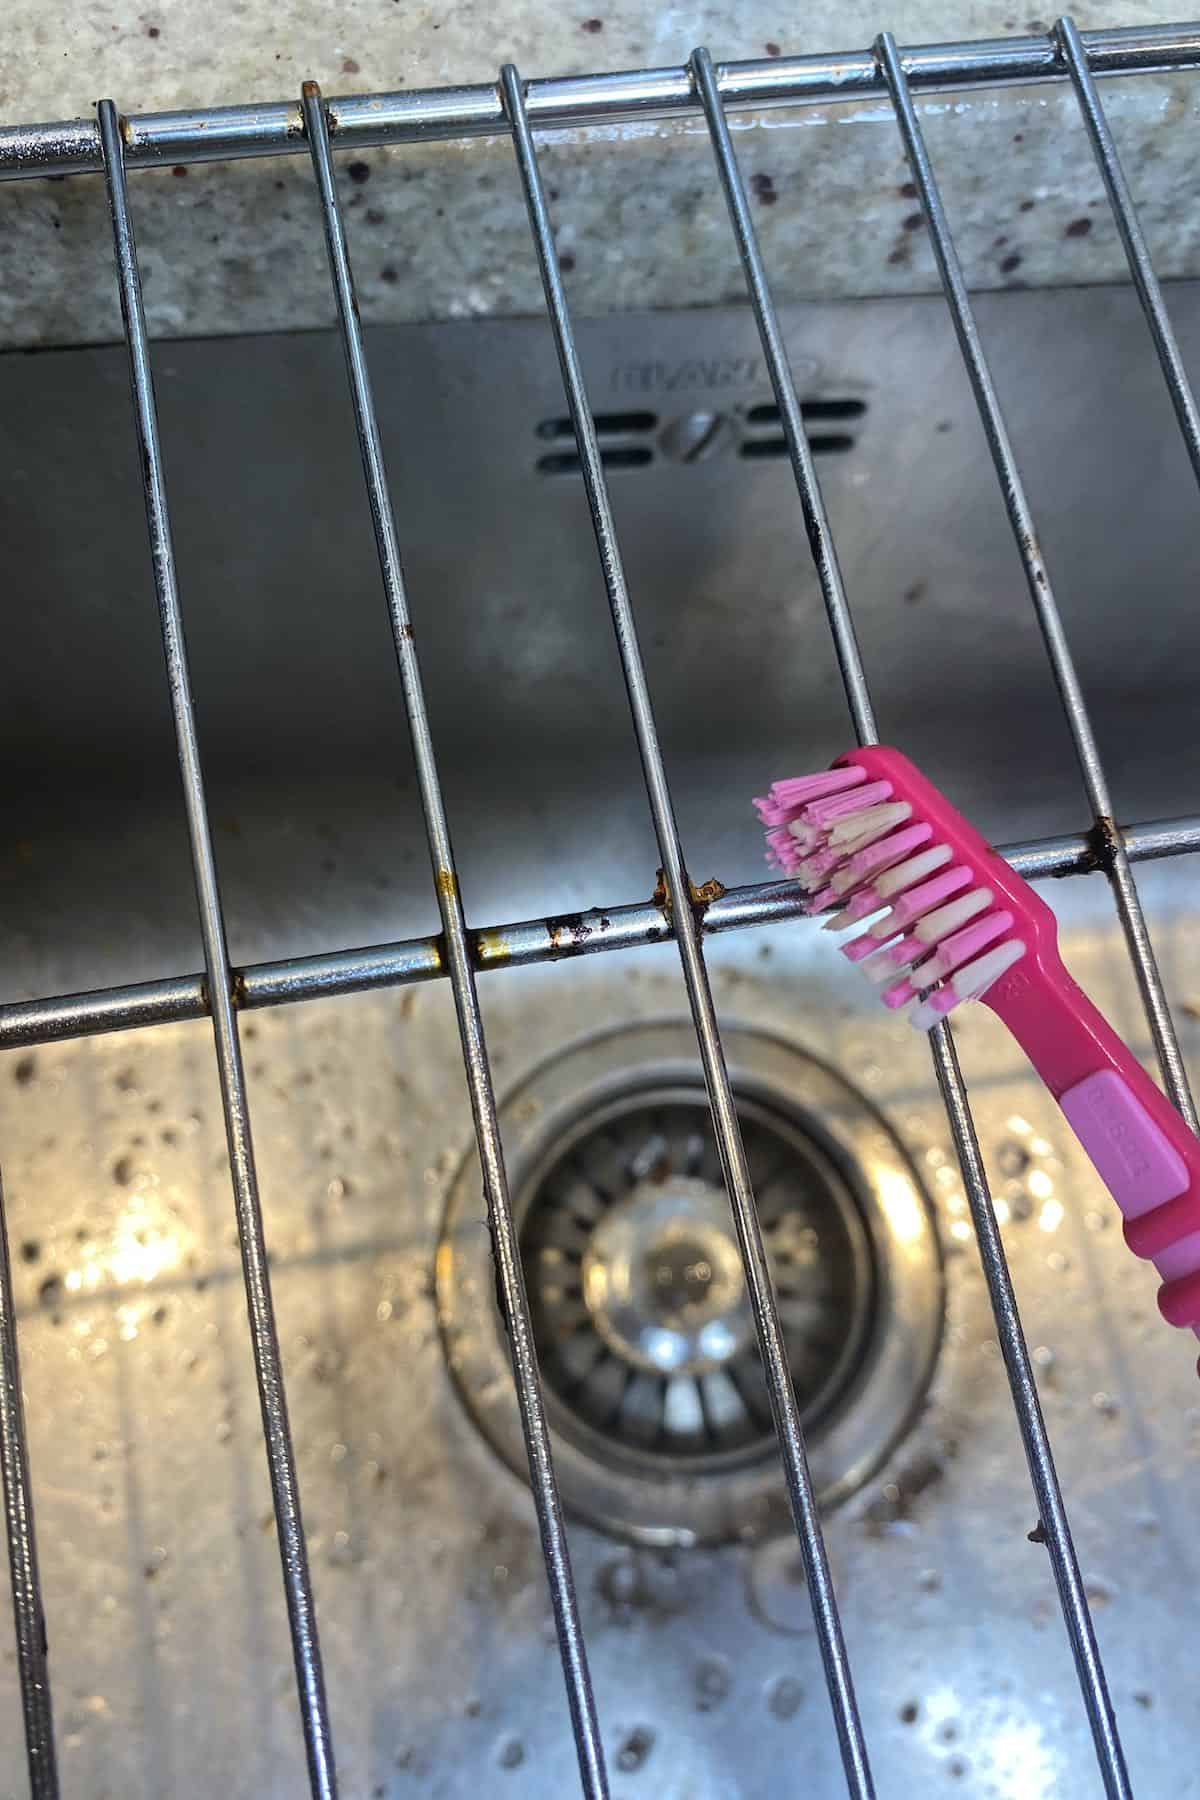 Scrubbing a baking rack with a toothbrush